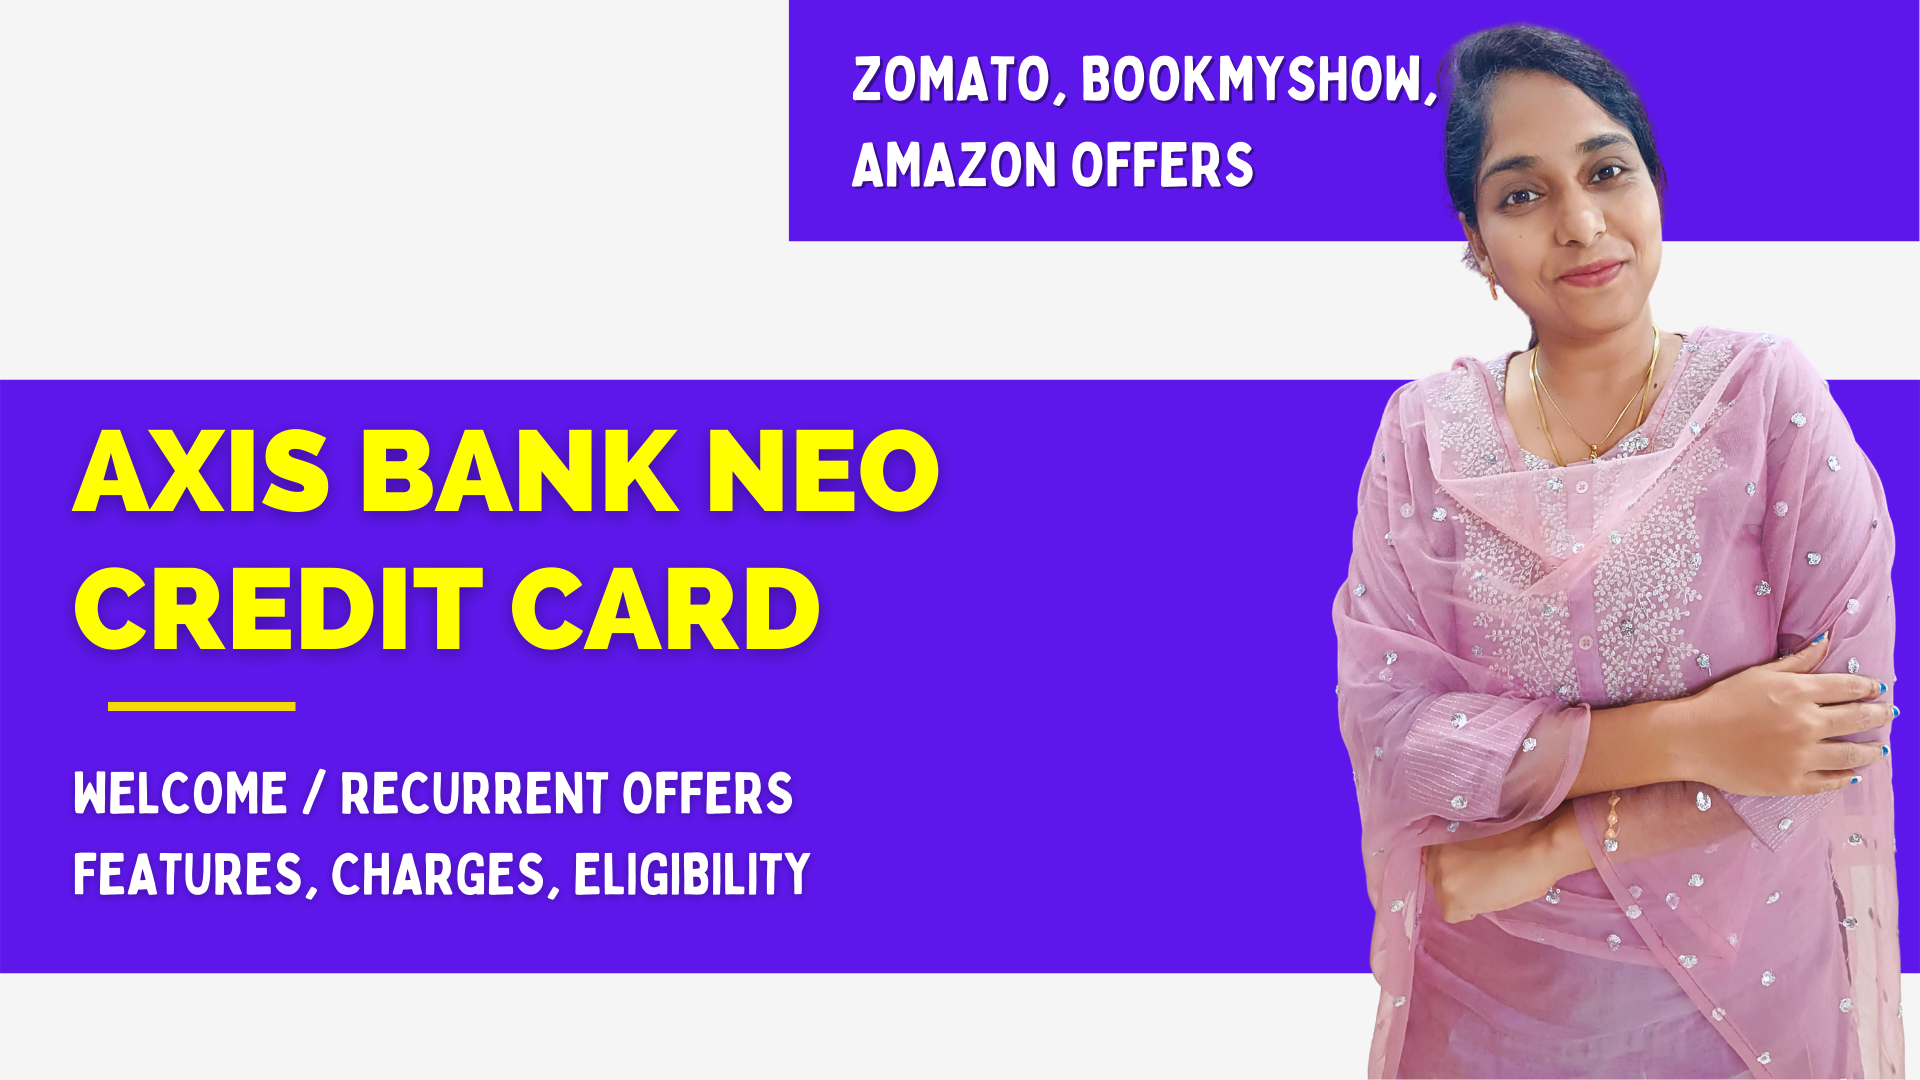 Axis Bank Neo Credit Card Features | Zomato, BookMyShow, Amazon & Other Offers | Charges, Fees Etc.